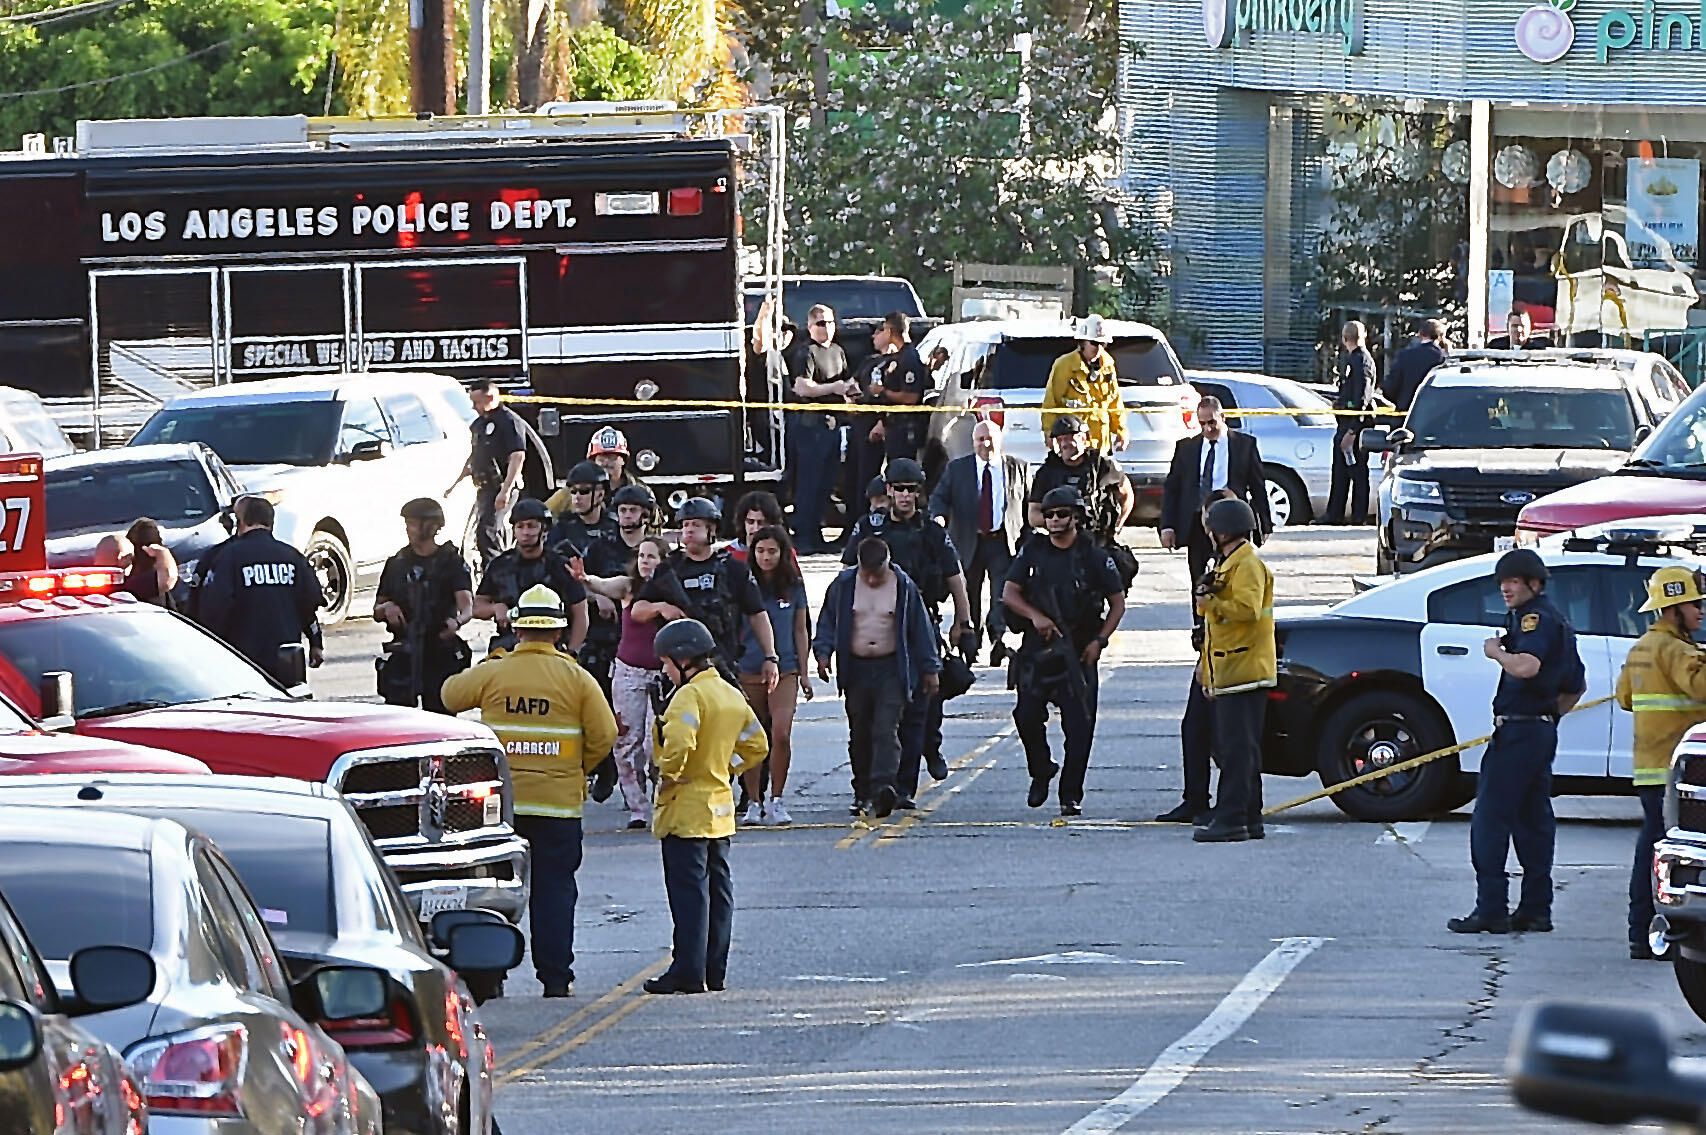 LAPD Says Trader Joe's Employee Killed by Officer's Bullet - Thumbnail Image